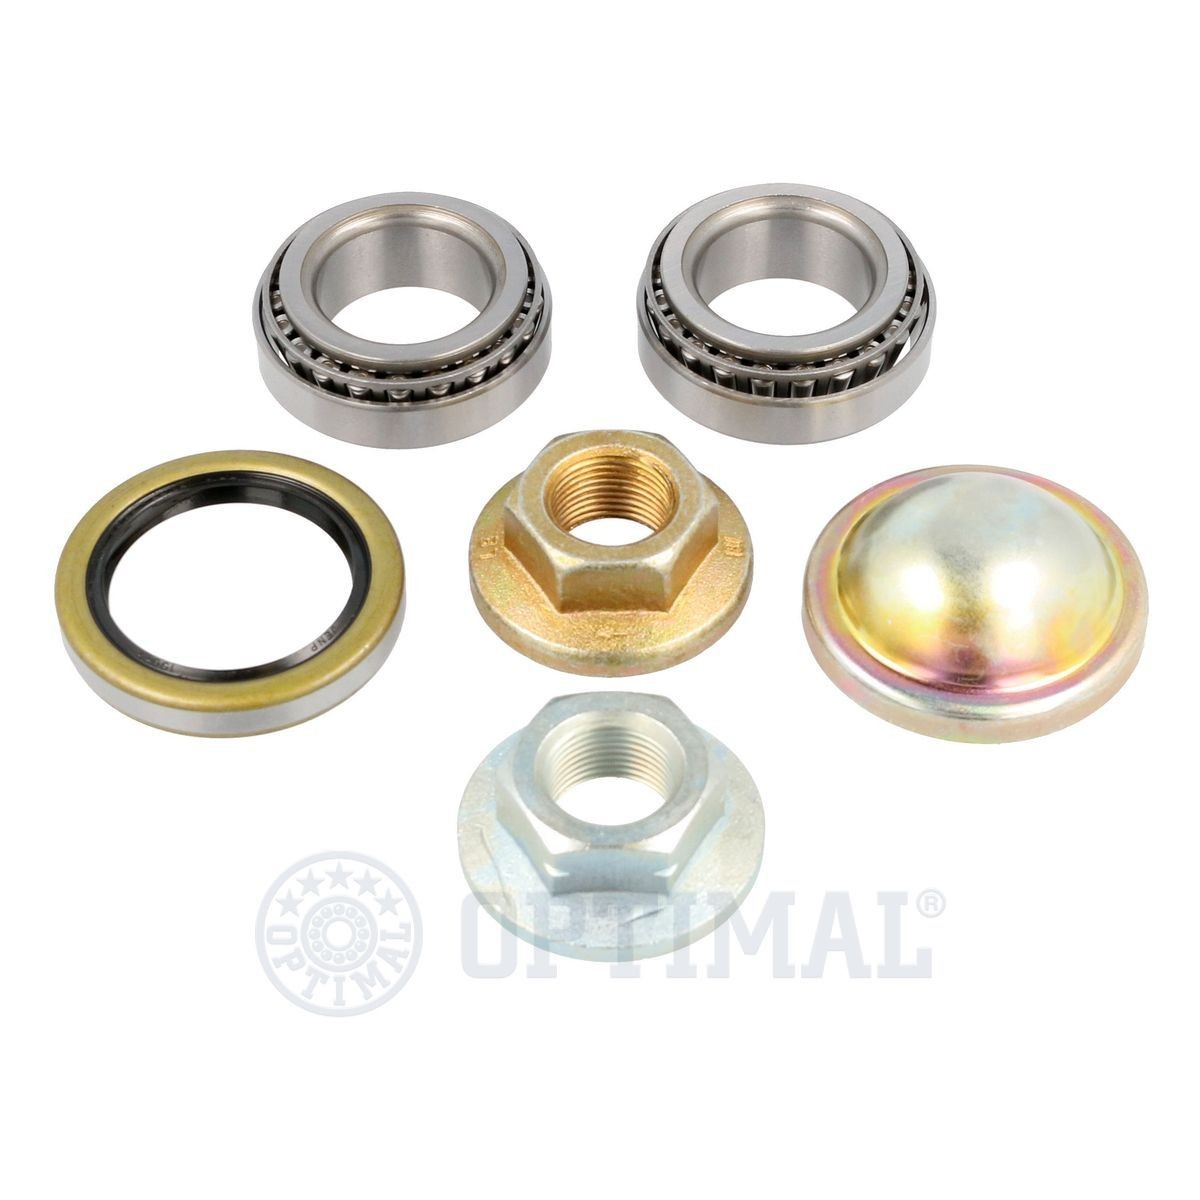 OPTIMAL 302058L Wheel bearing kit with accessories, with fastening material, 50,3 mm